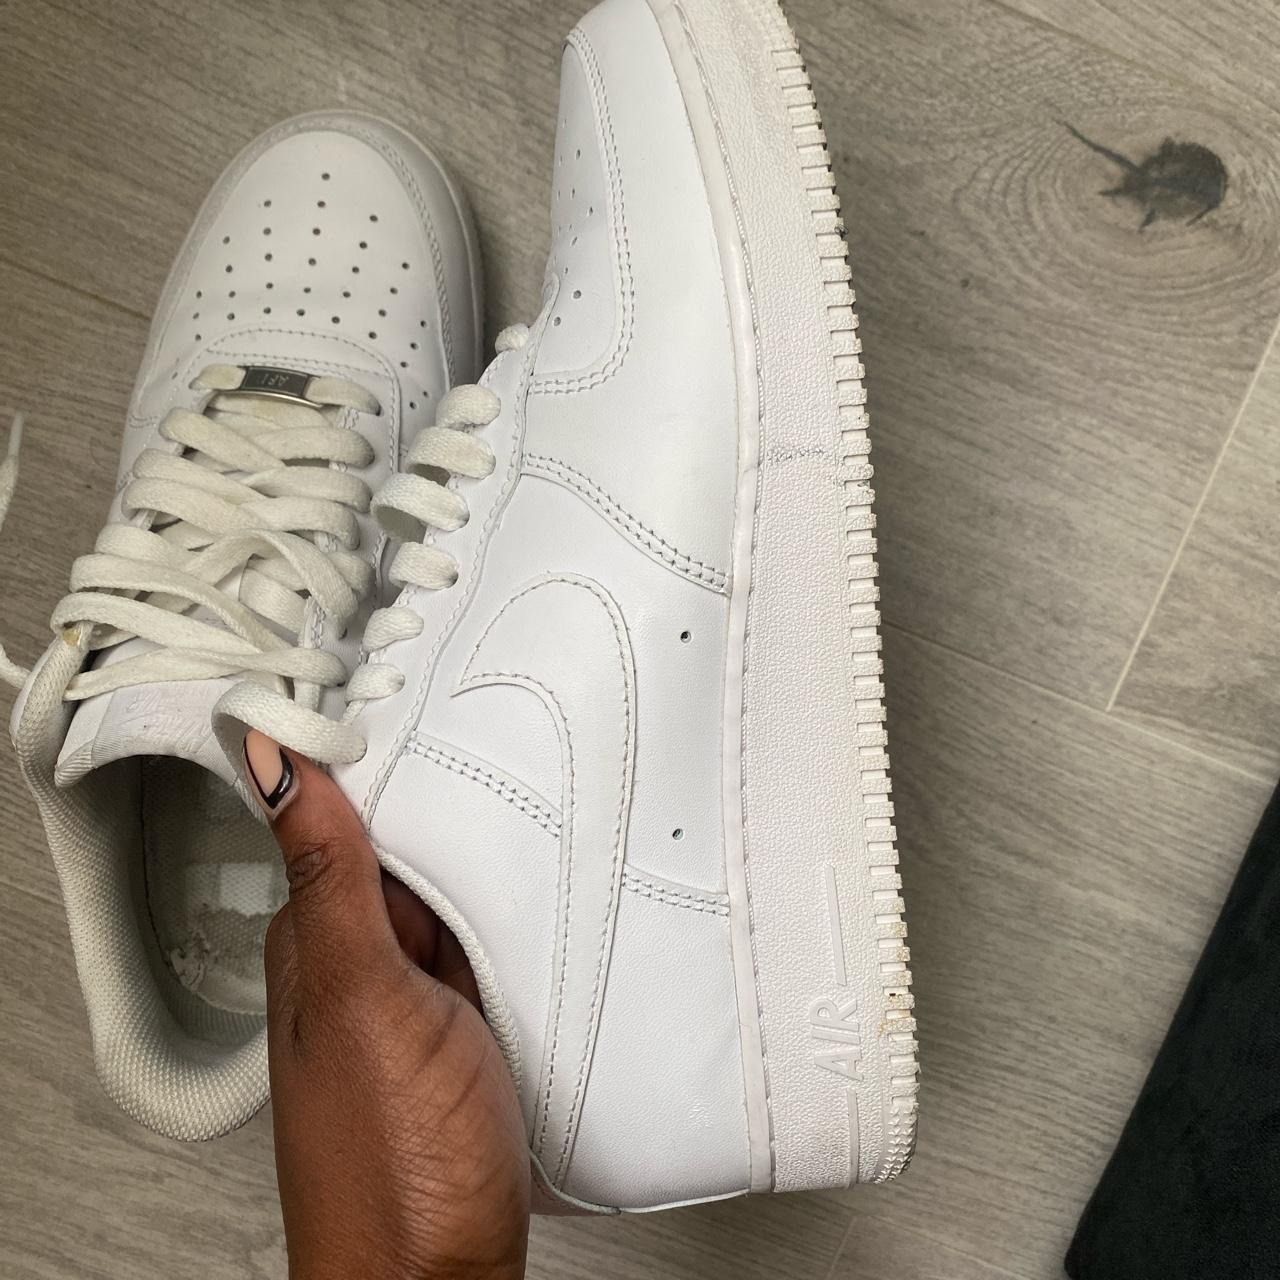 Nike Airforces / Air Force 1’s white size 7.5 - Depop